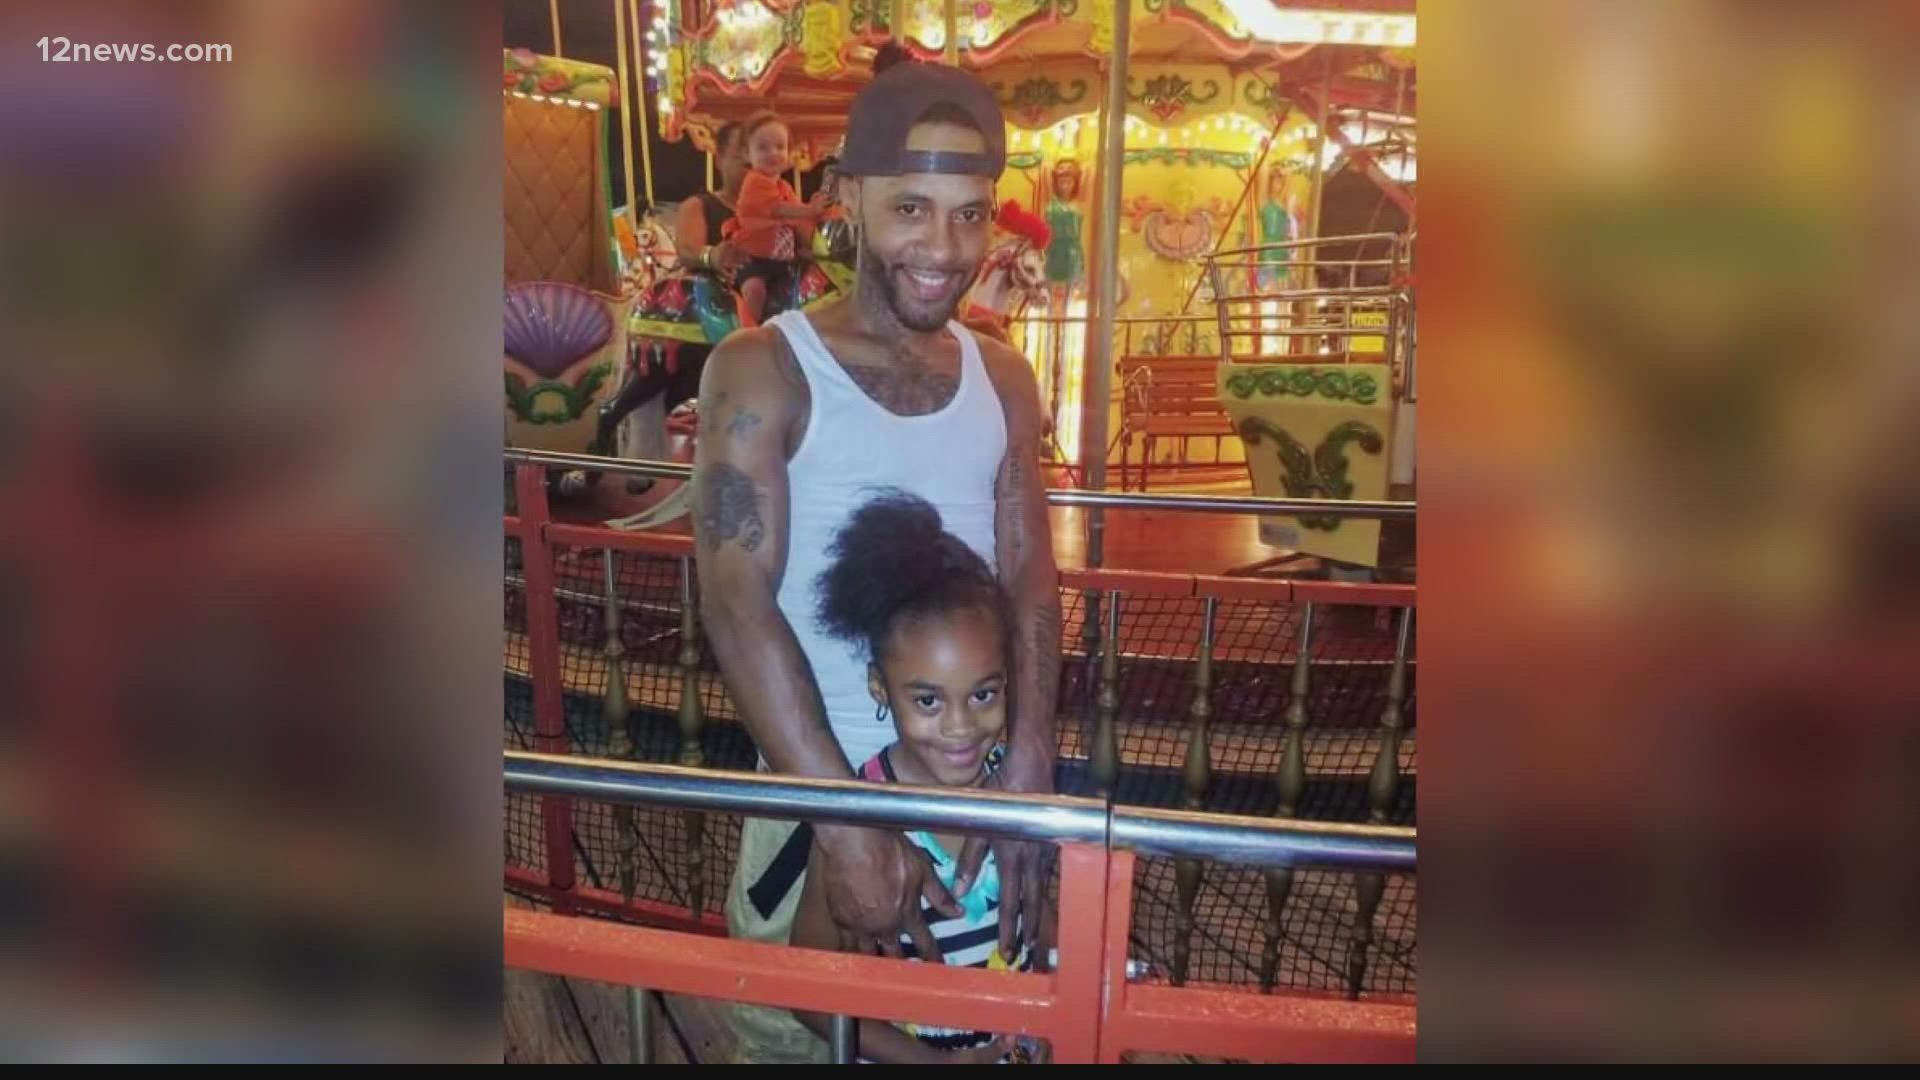 Kevin Maddox said his 9-year-old daughter, Aleyah McIntyre, never should have been with her mother. Retta Cruse, Aleyah's mother, has been charged with her murder.